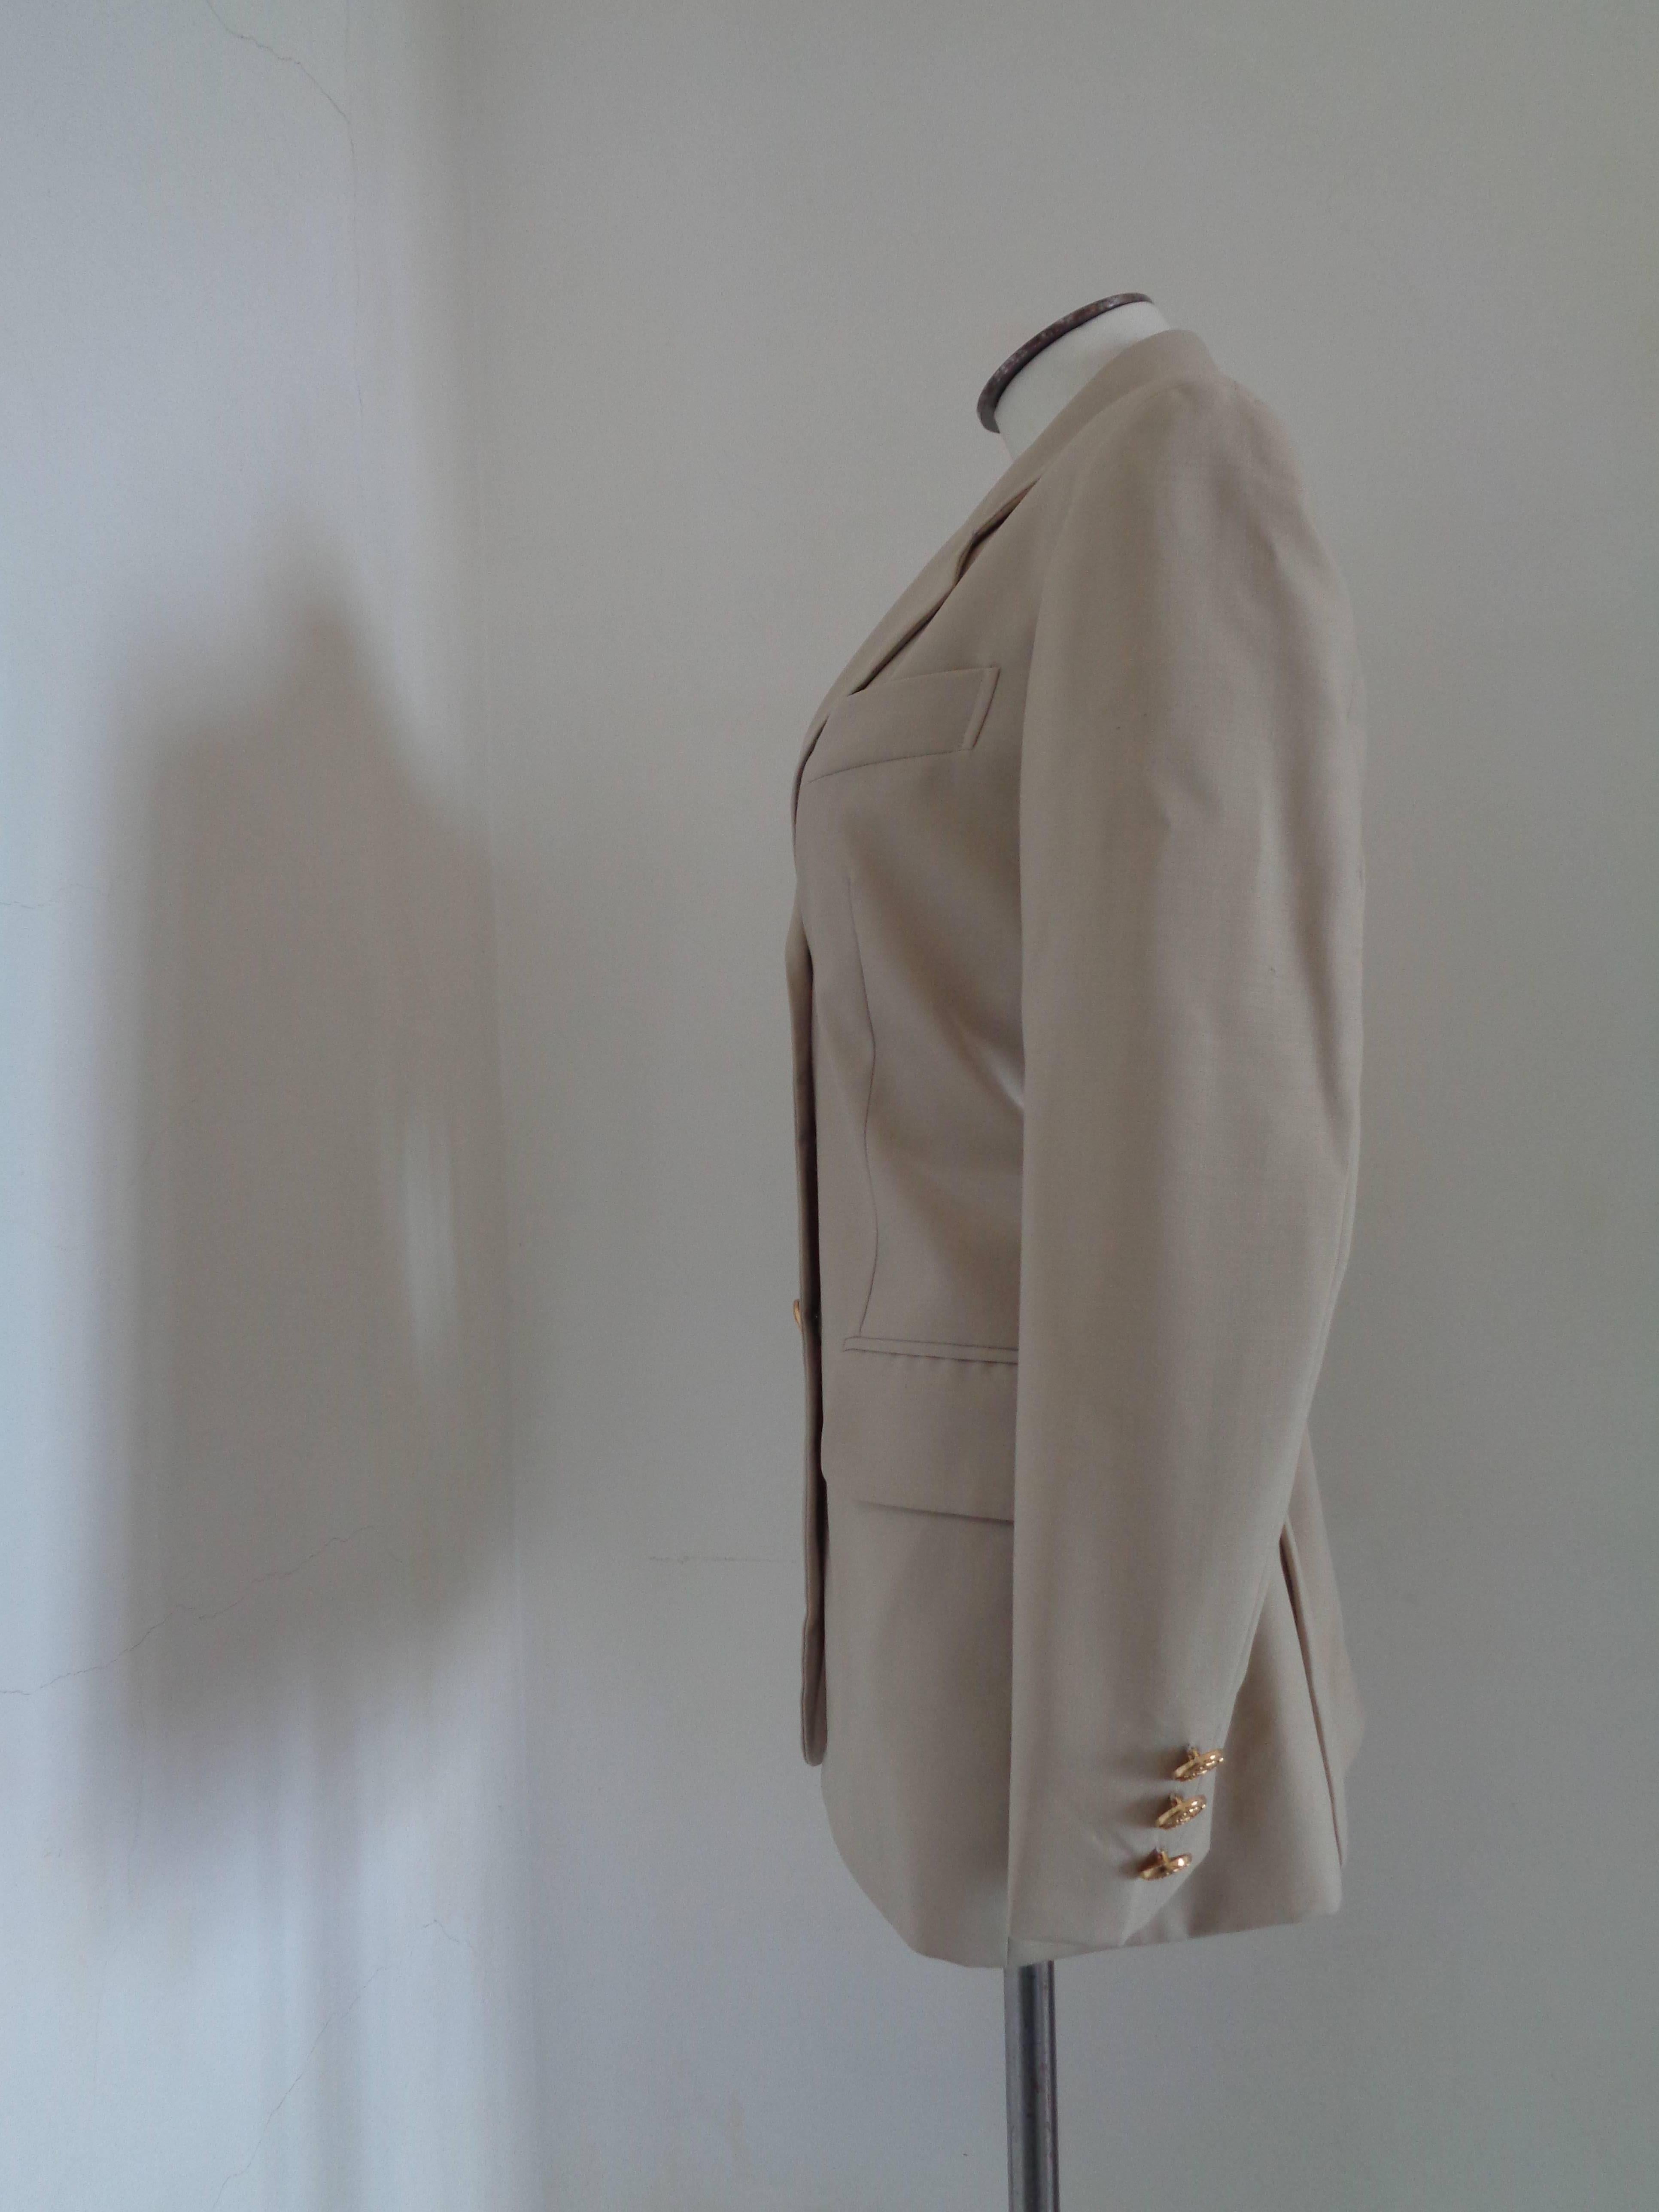 Moschino Cheap & Chic beije Wool Jacket In Excellent Condition For Sale In Capri, IT